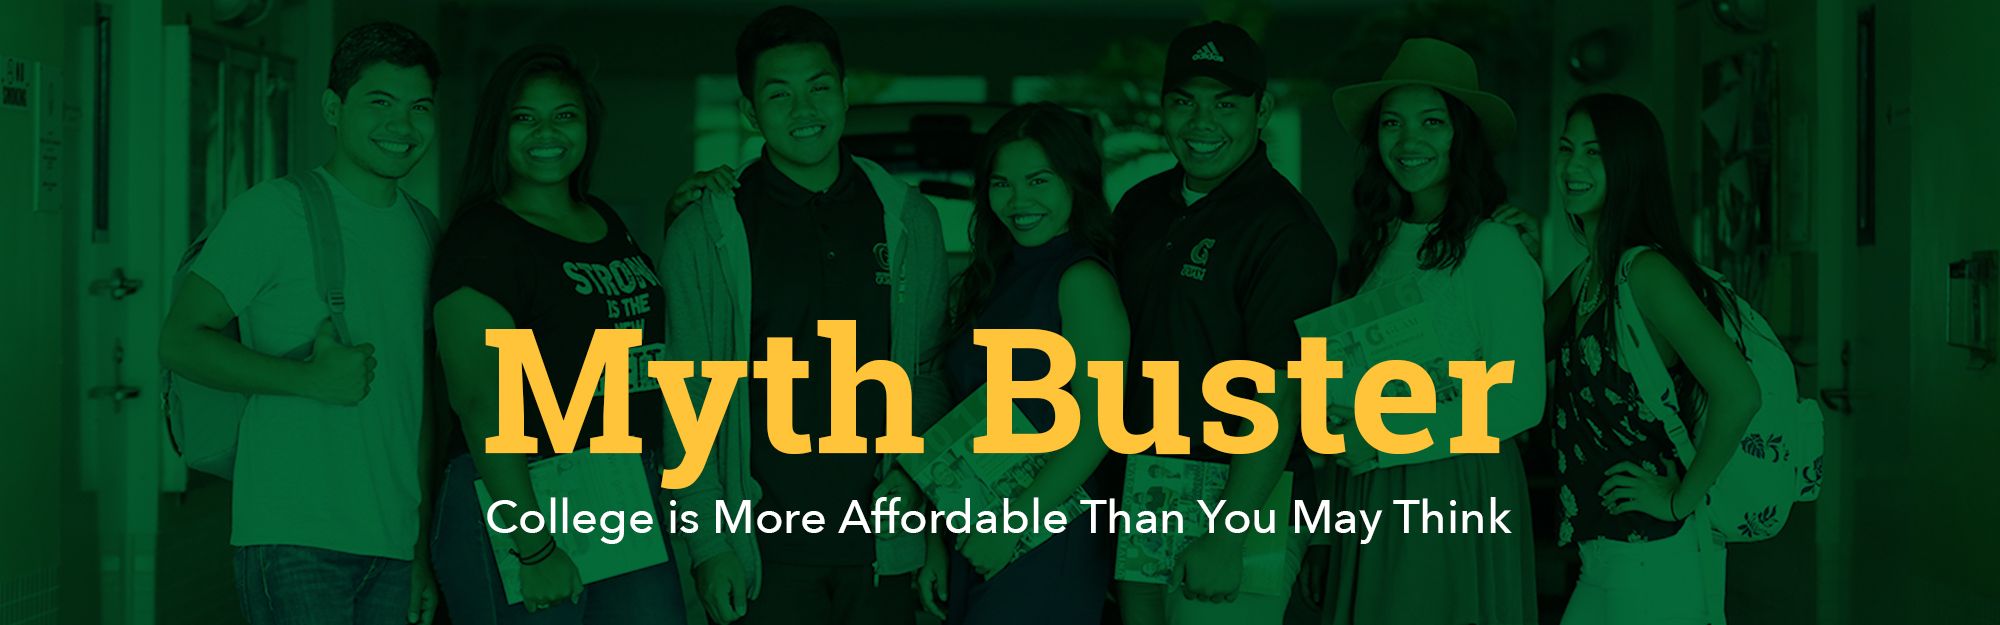 Myth buster: College is more affordable than you may think